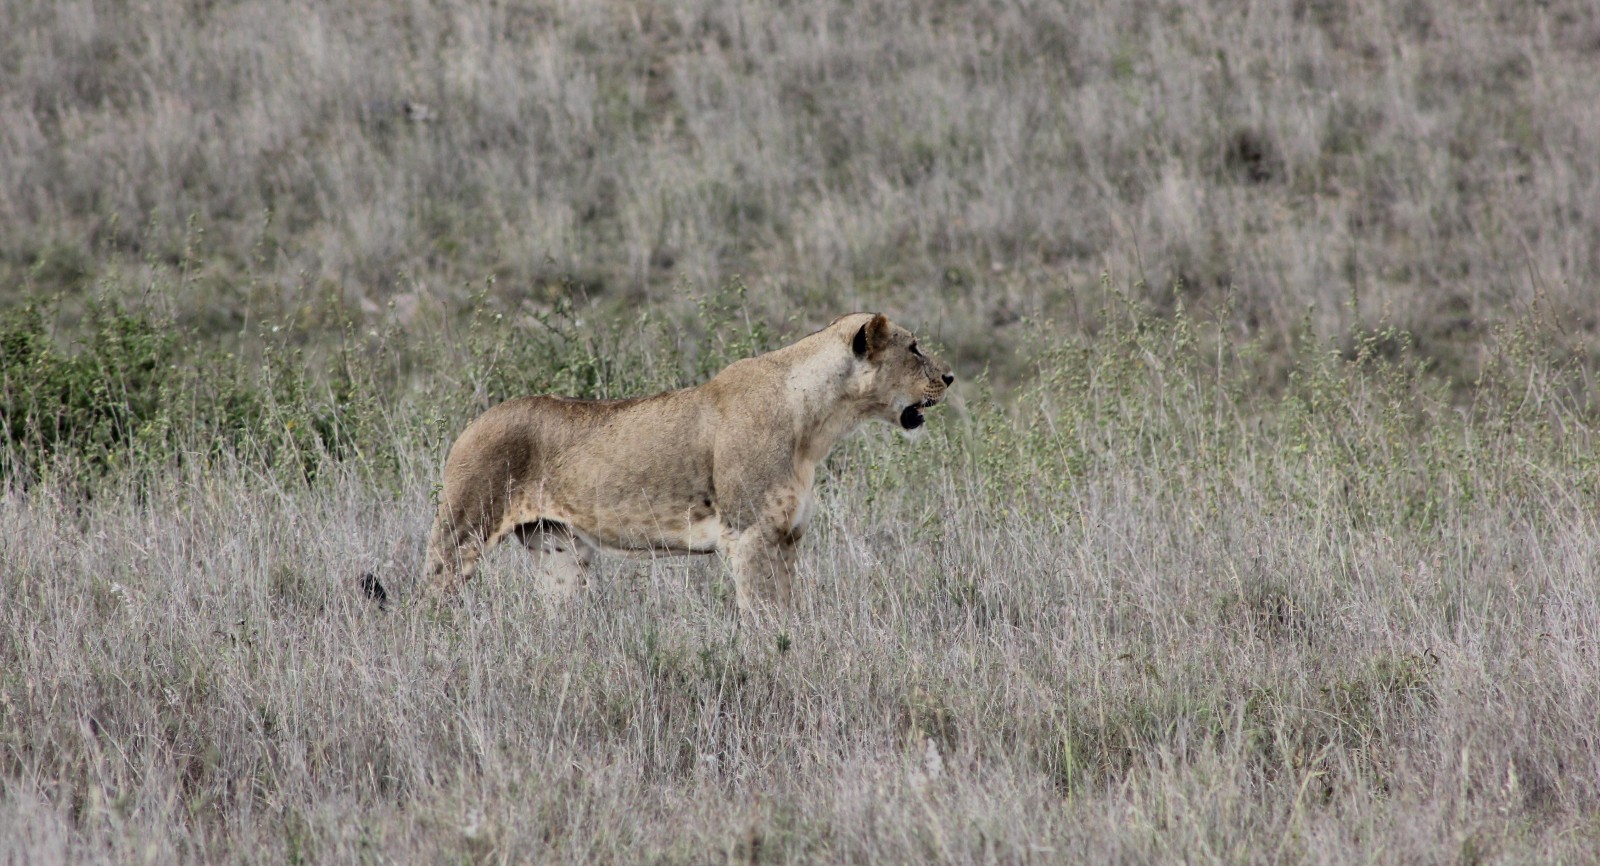 A lioness standing in a dry and barren looking patch of grass